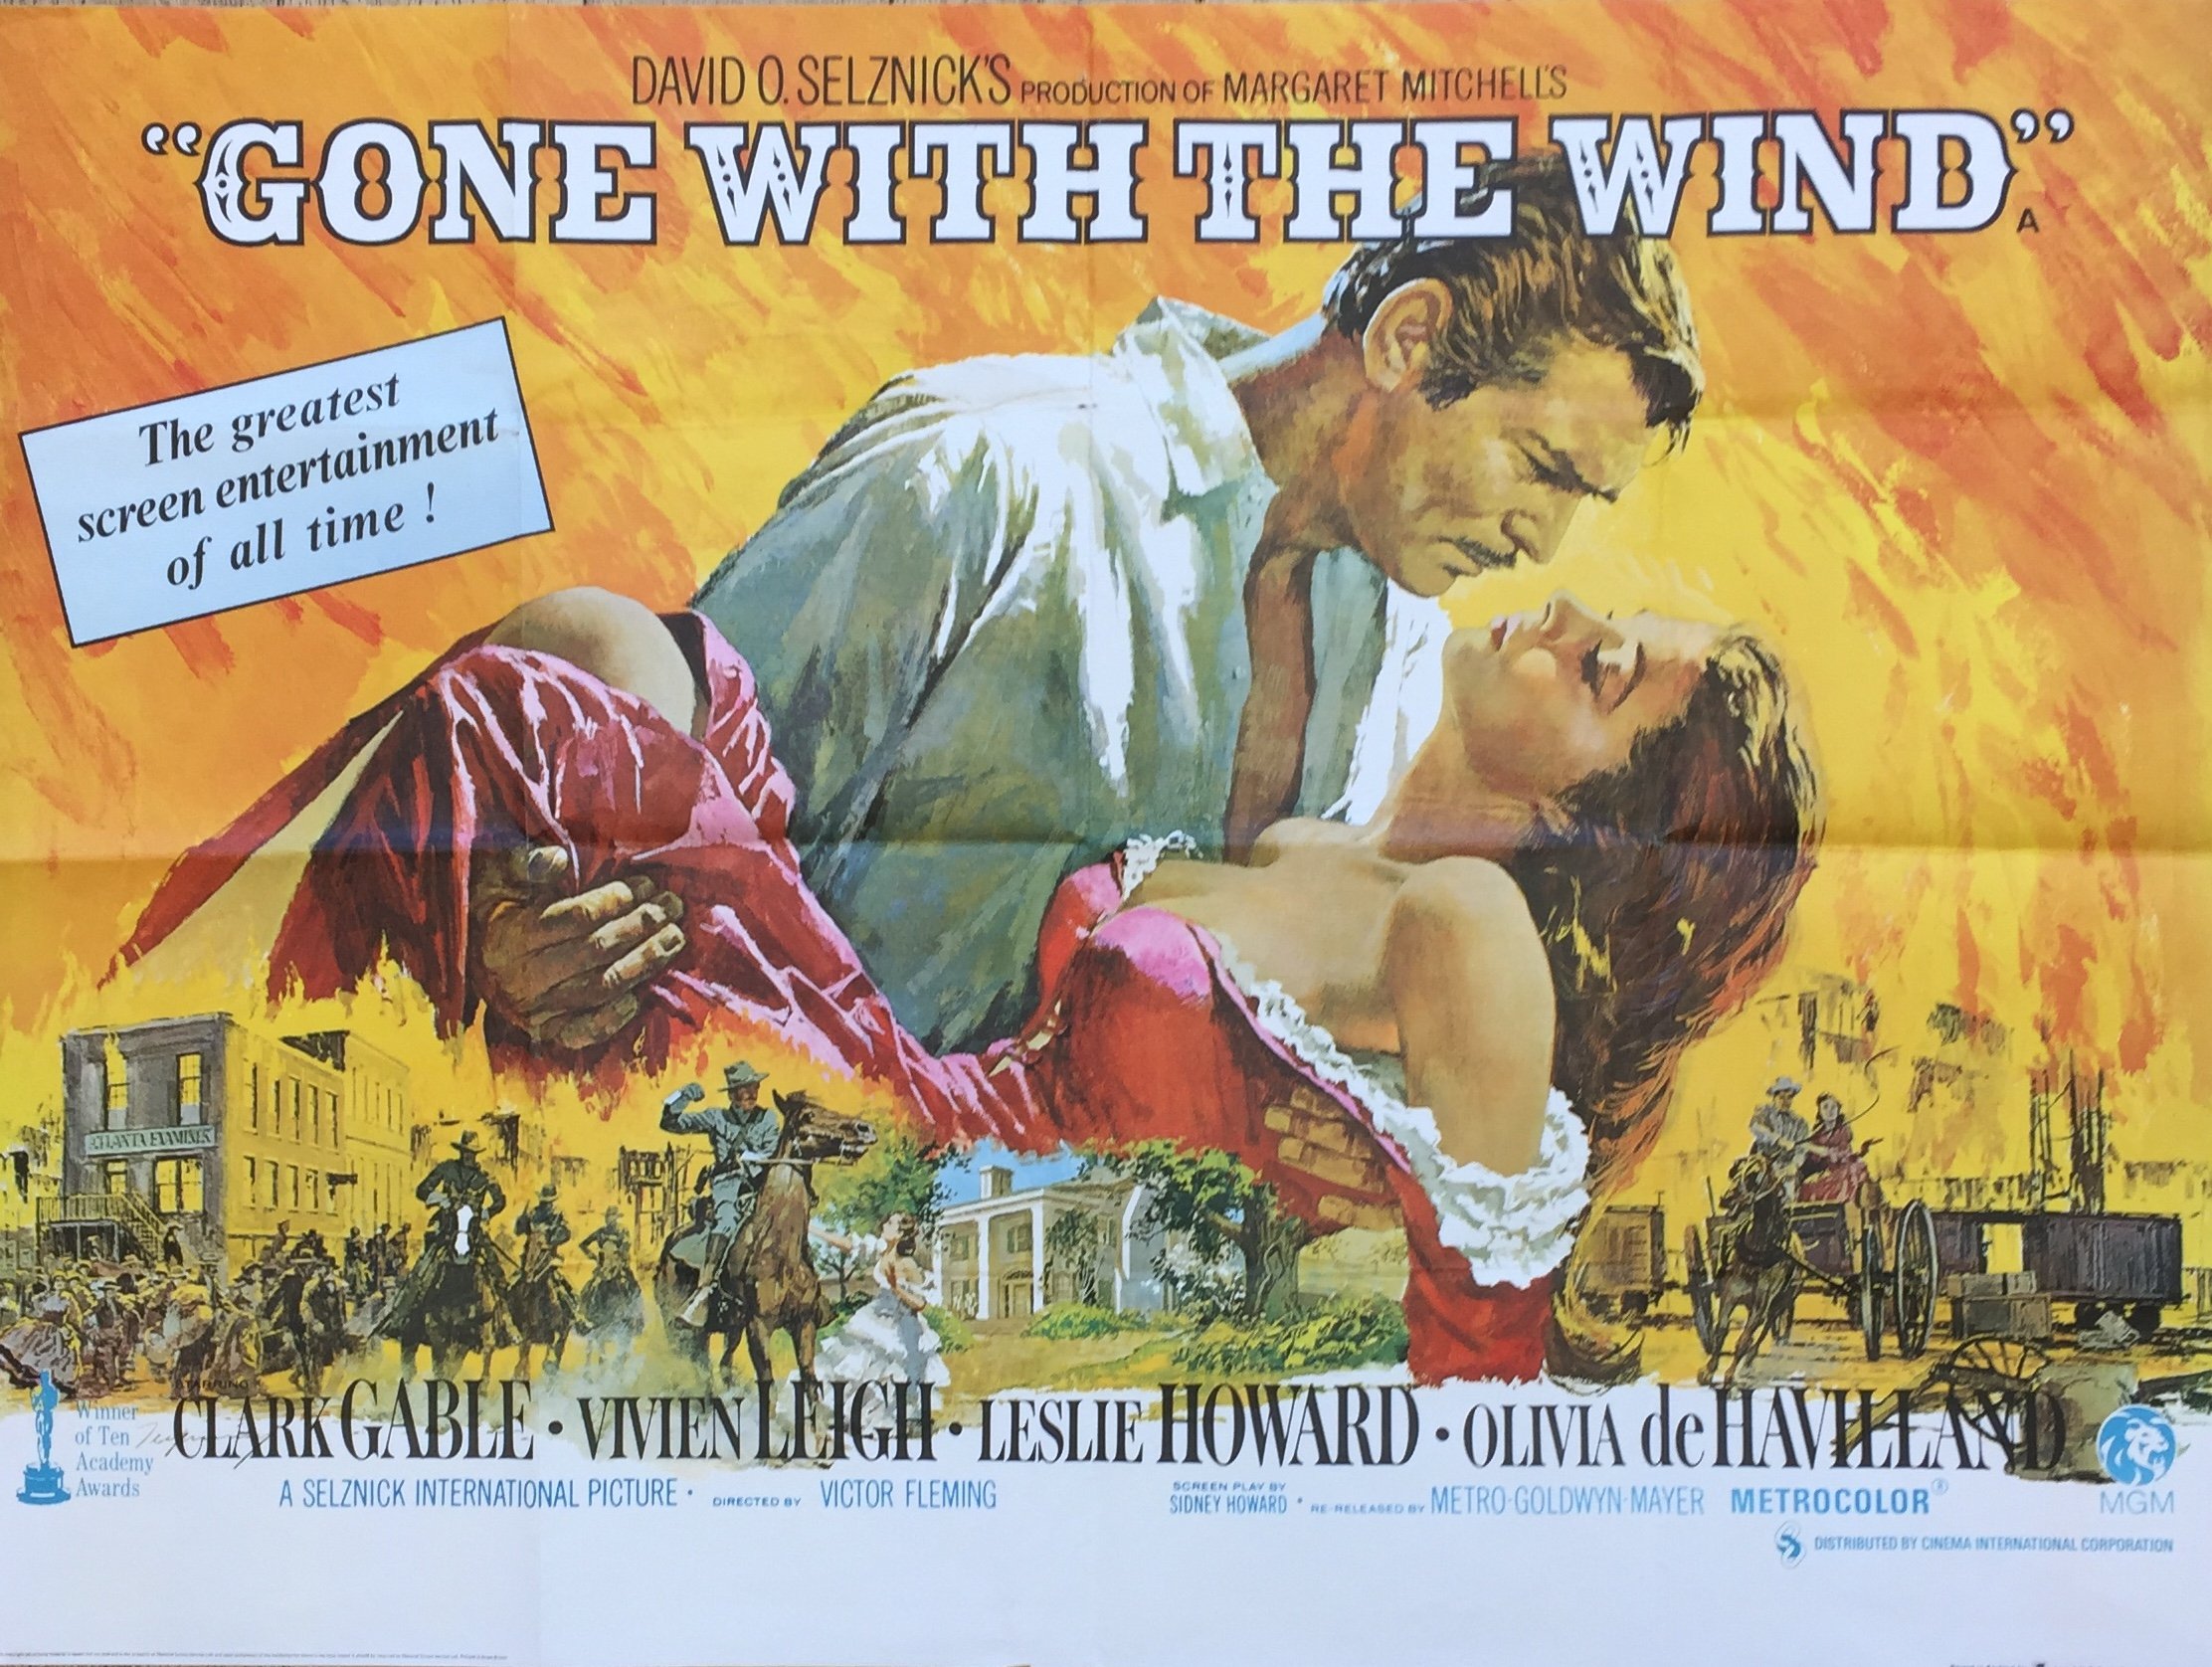 Original vintage movie poster for Gone With the Wind